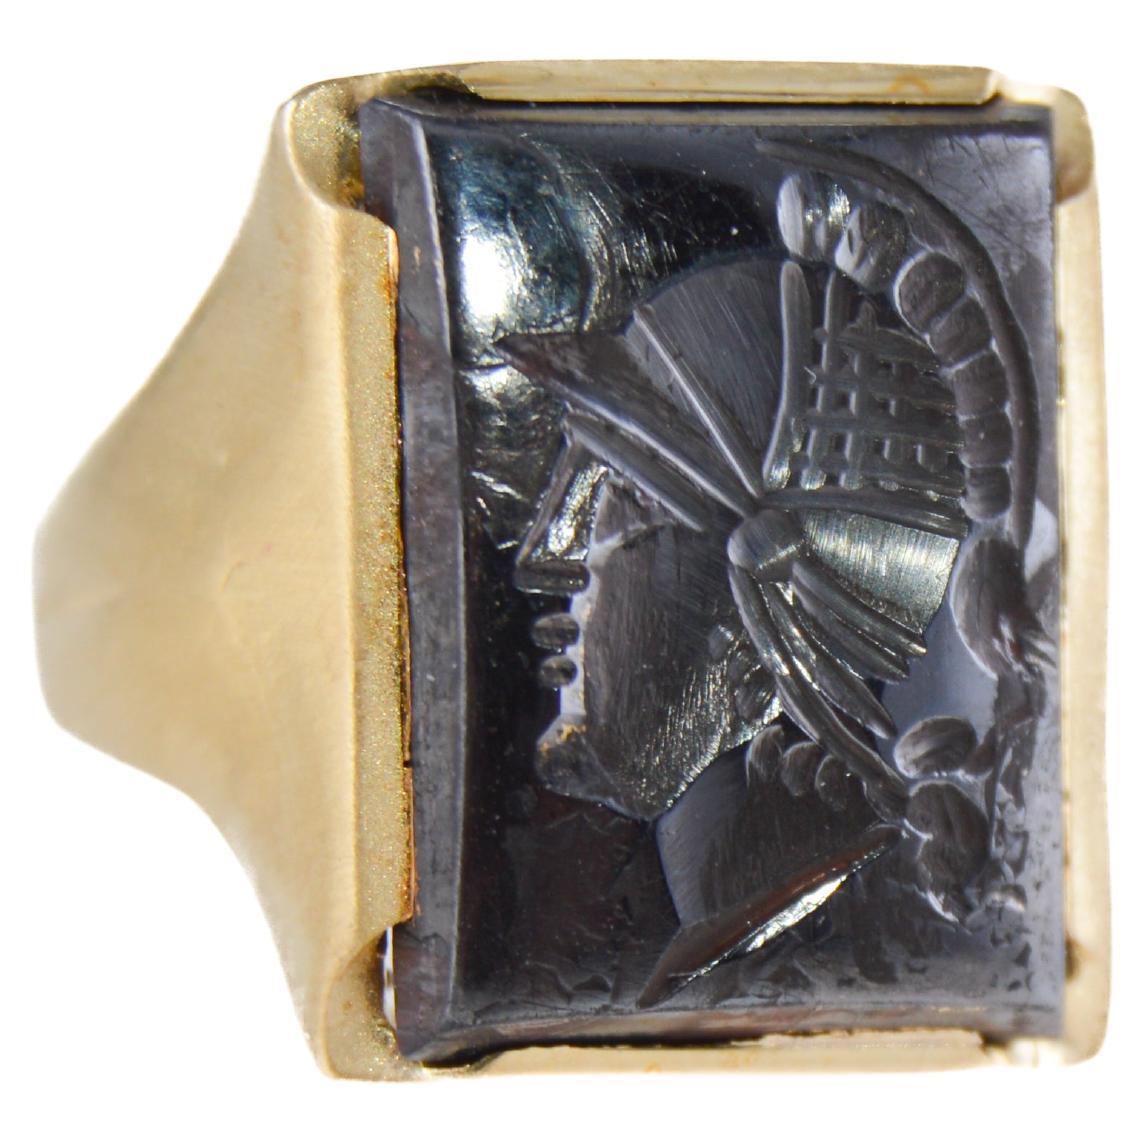 STYLE / REFERENCE: Art Deco
METAL / MATERIAL: 10Kt. Solid Gold 
CIRCA / YEAR: 1940's
SIZE: 8

This unique hand made ring is set with a genuine Hematite Stone that is hand carved by master stone carvers. The workmanship is excellent and the ring is